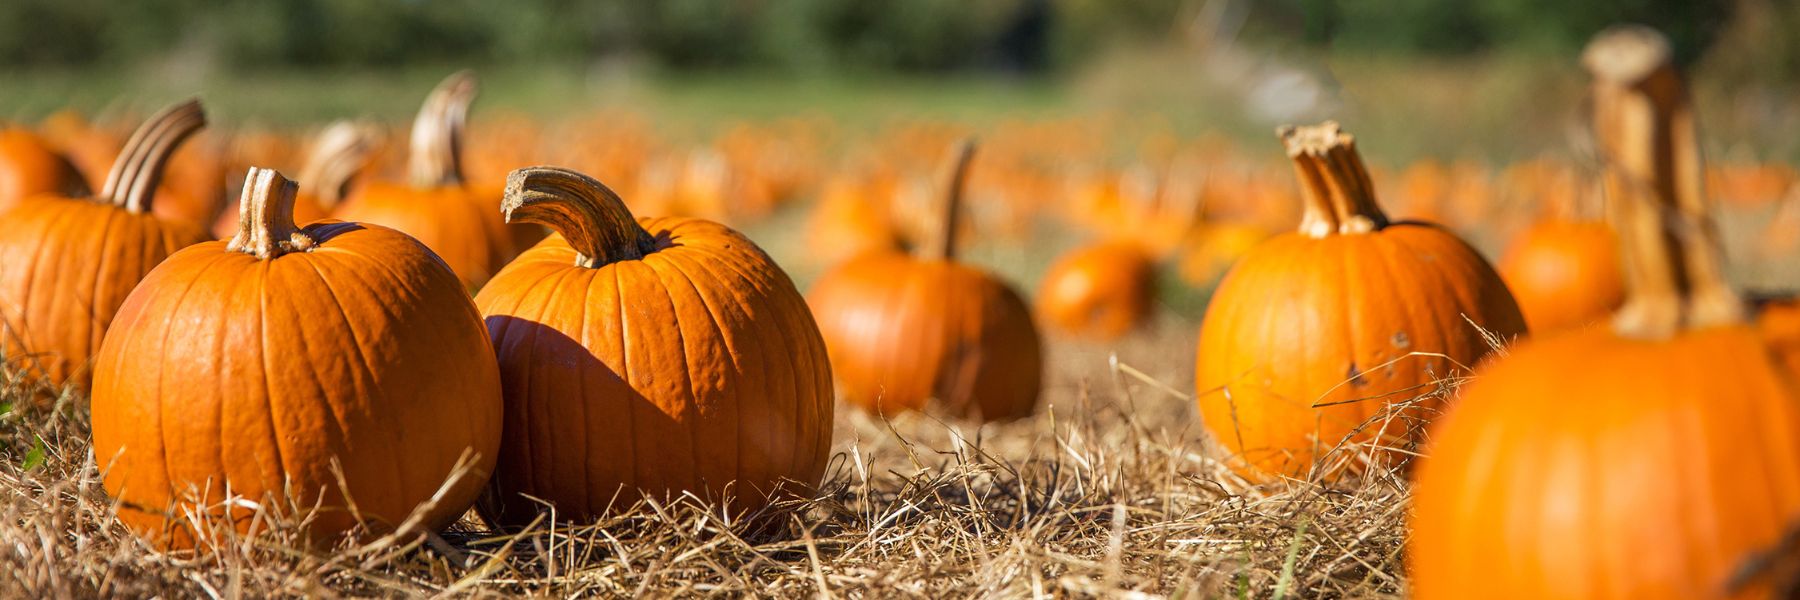 Alongside picture-perfect pumpkins, these St. Louis pumpkin patches offer massive corn mazes, bouncy wagon rides and festive foods to enjoy with your friends and family.